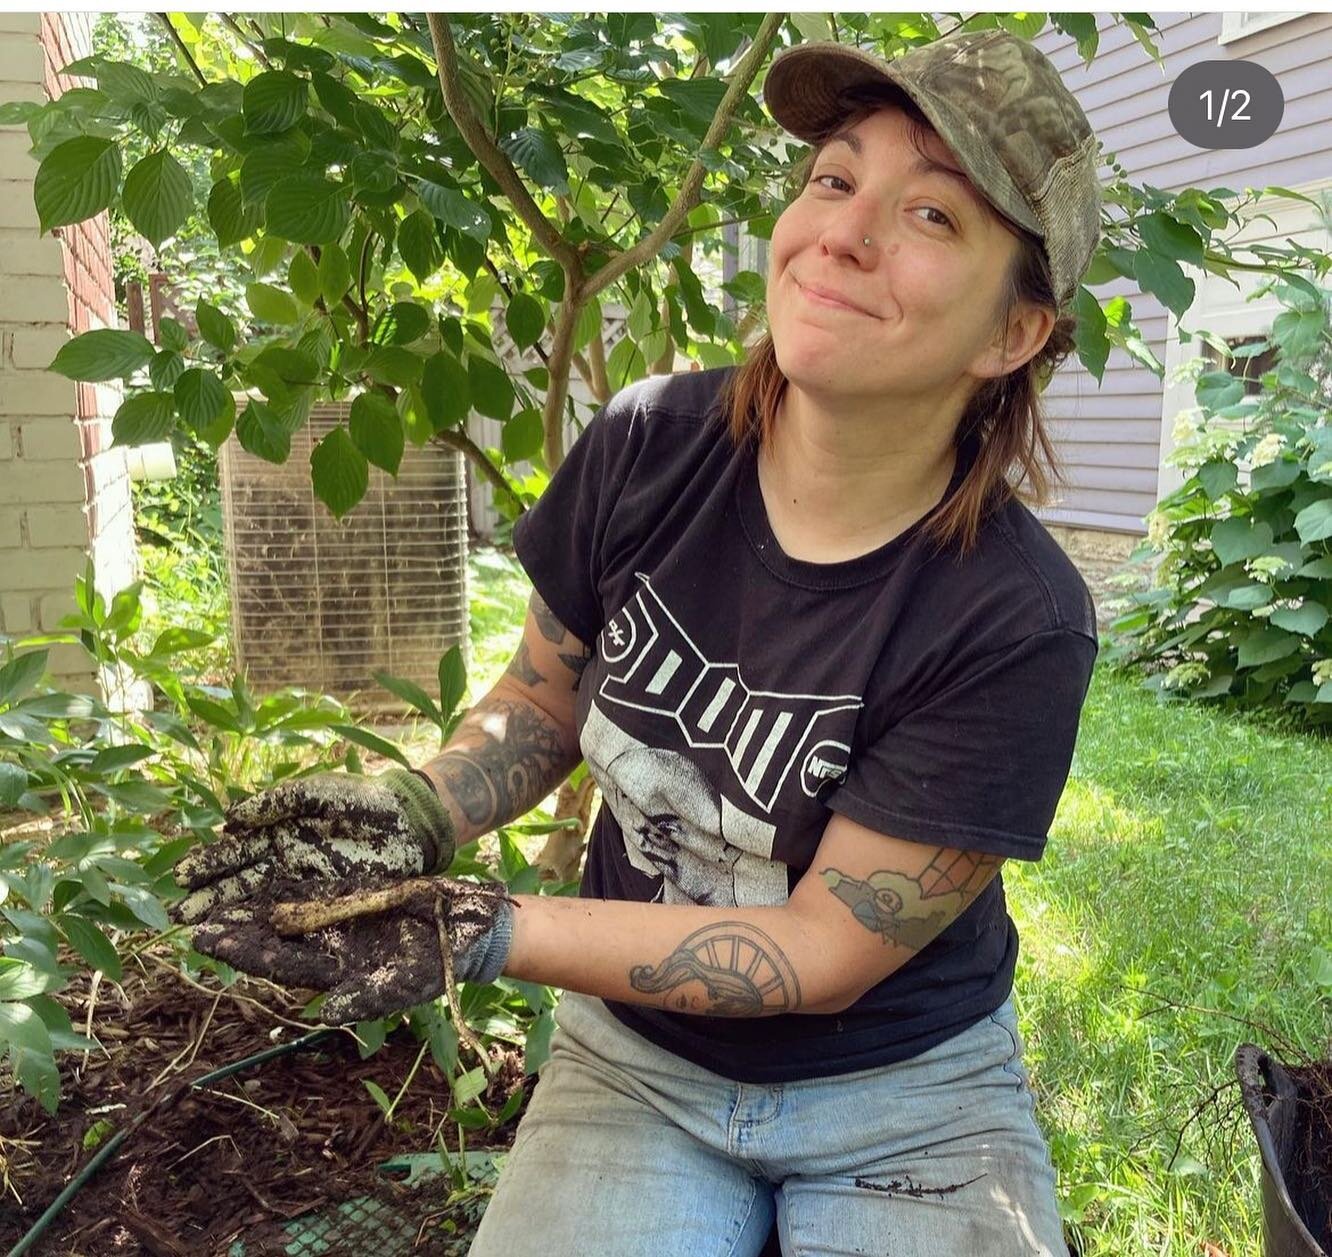 The Rebel Alliance of kind, hard working, rad humans is changing the landscaping scene in Minneapolis @isthispinterest @venus_cry_trap @theblackradish_ @radicle_land_collective @potluck_design_build @sheila_the_gardener @phillipsgarden @nickioswald @